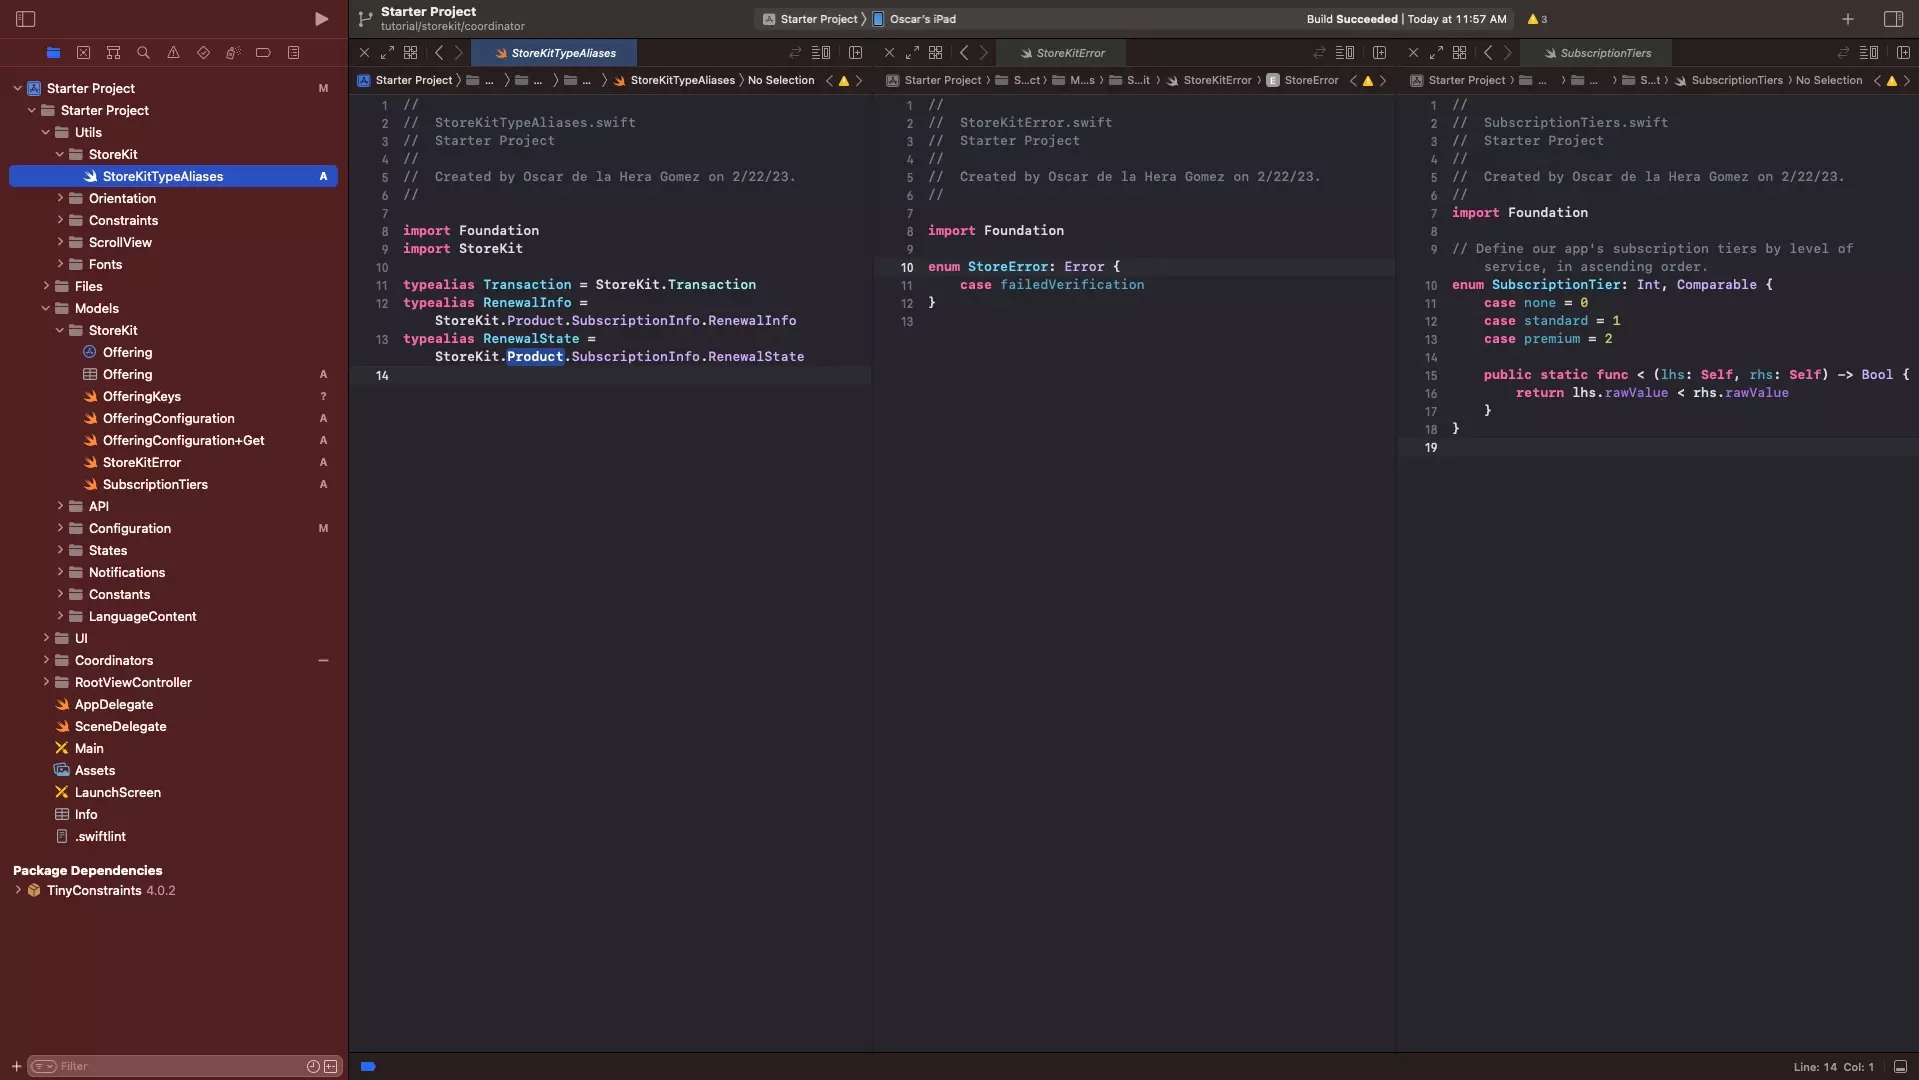 A screenshot of XCode showing the files created for the additional models and utilities.